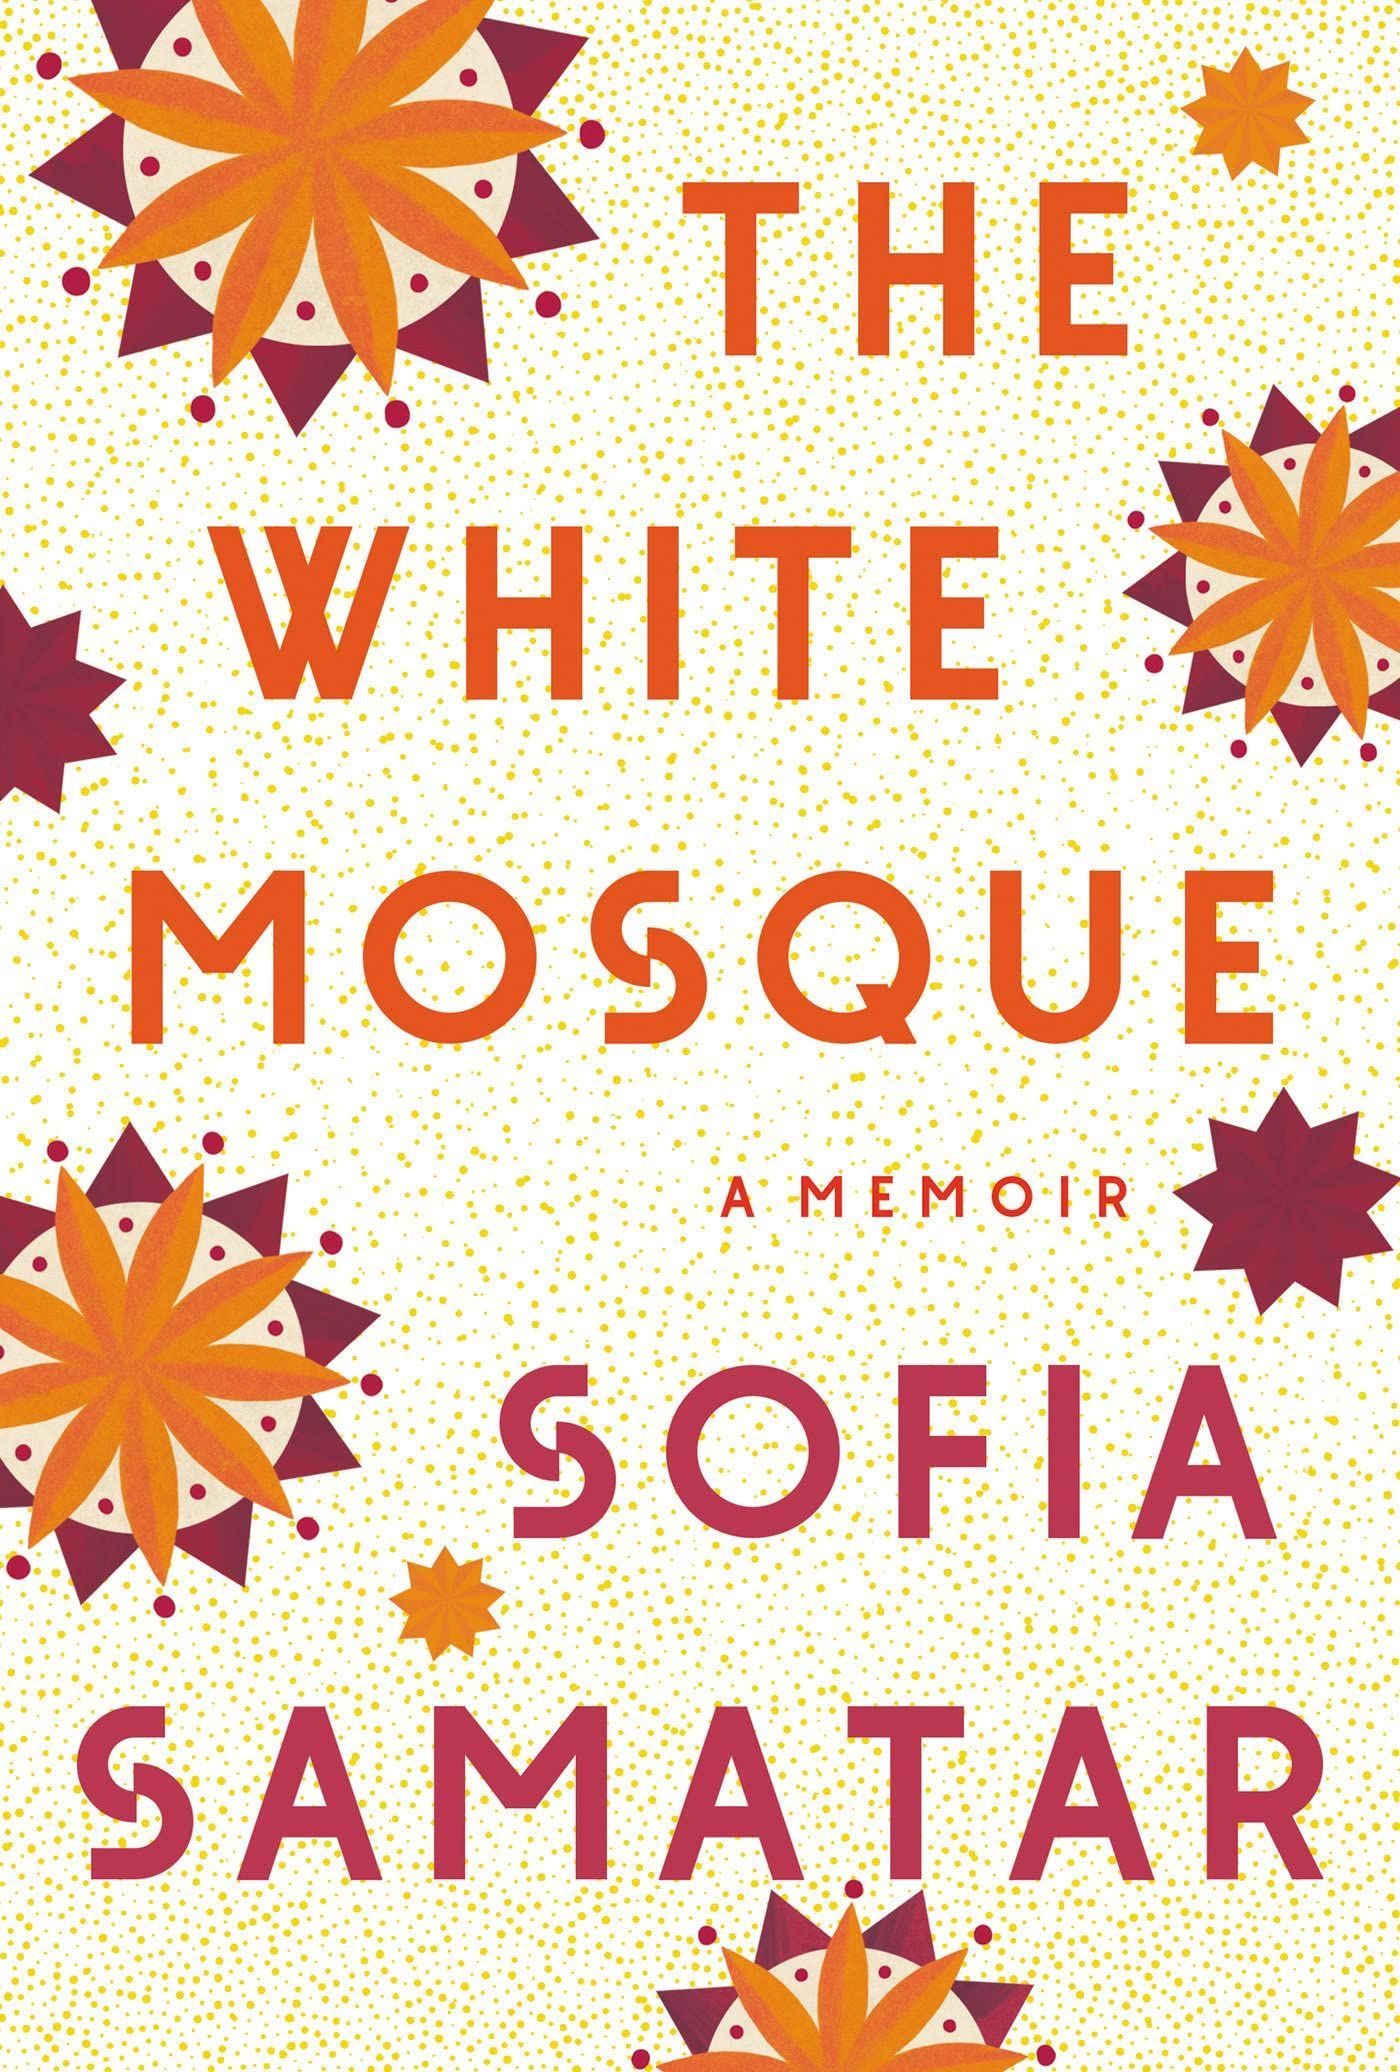 A Third Term Is Possible: On Sofia Samatar’s “The White Mosque”